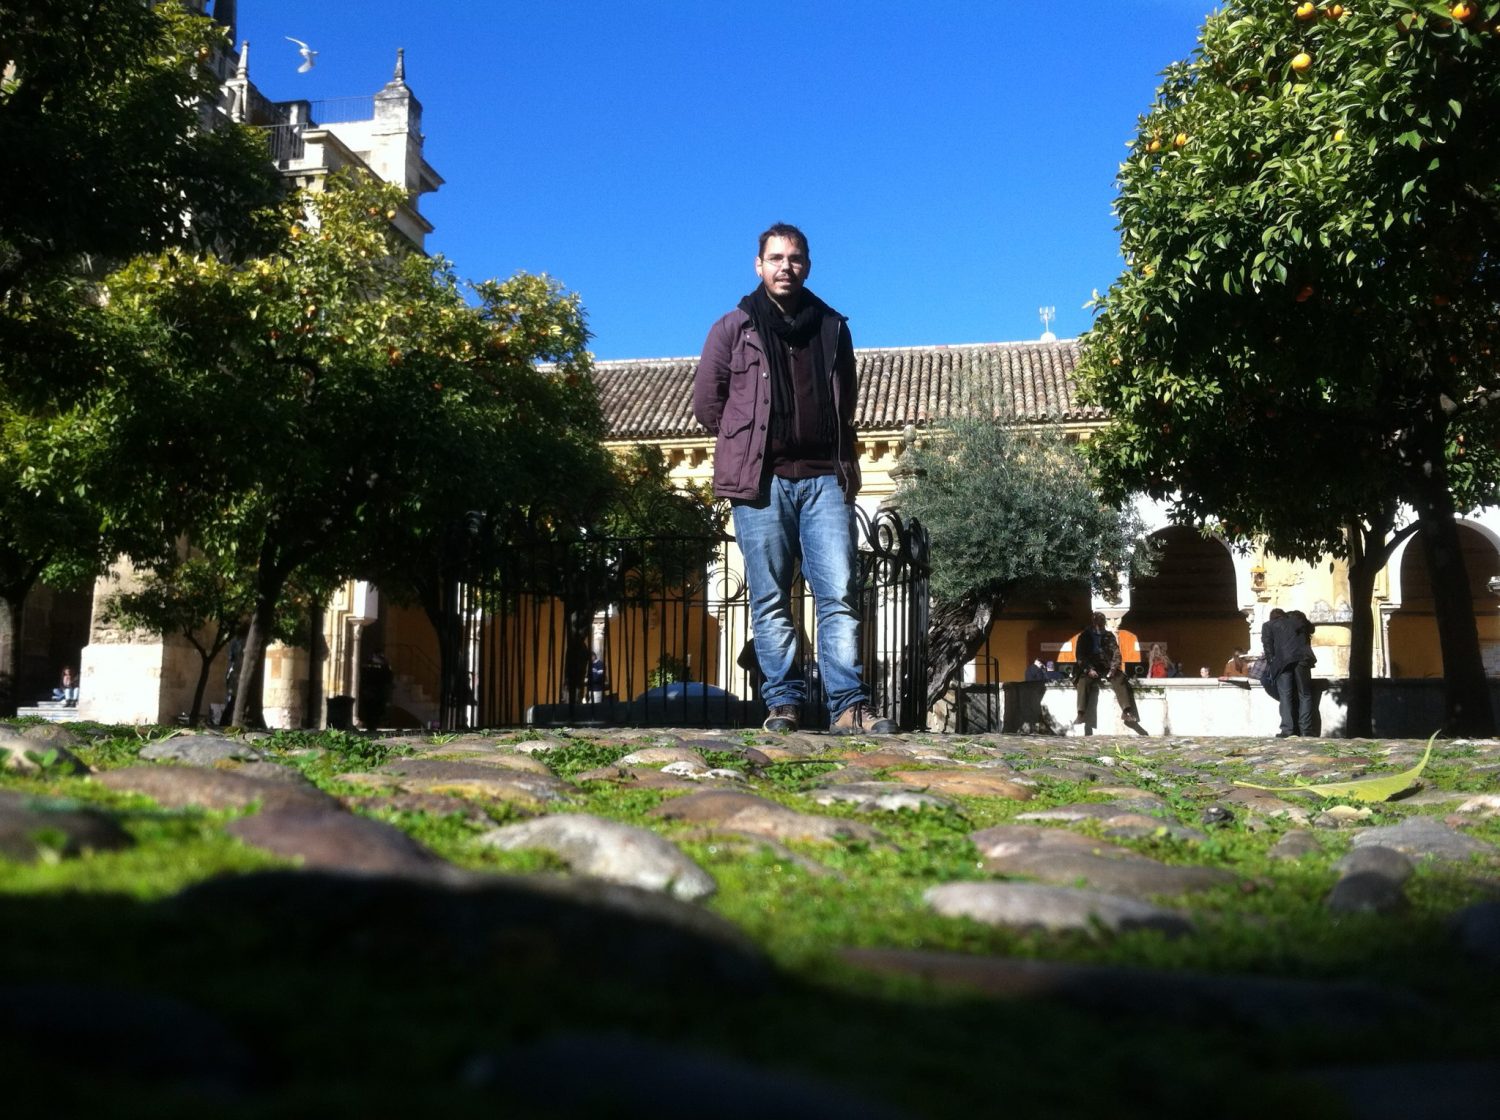 Dr. George Archer taking a walk on the pagan Roman foundations of the Islamic mosque courtyard of the Catholic Catedral de Santa María de la Sede.